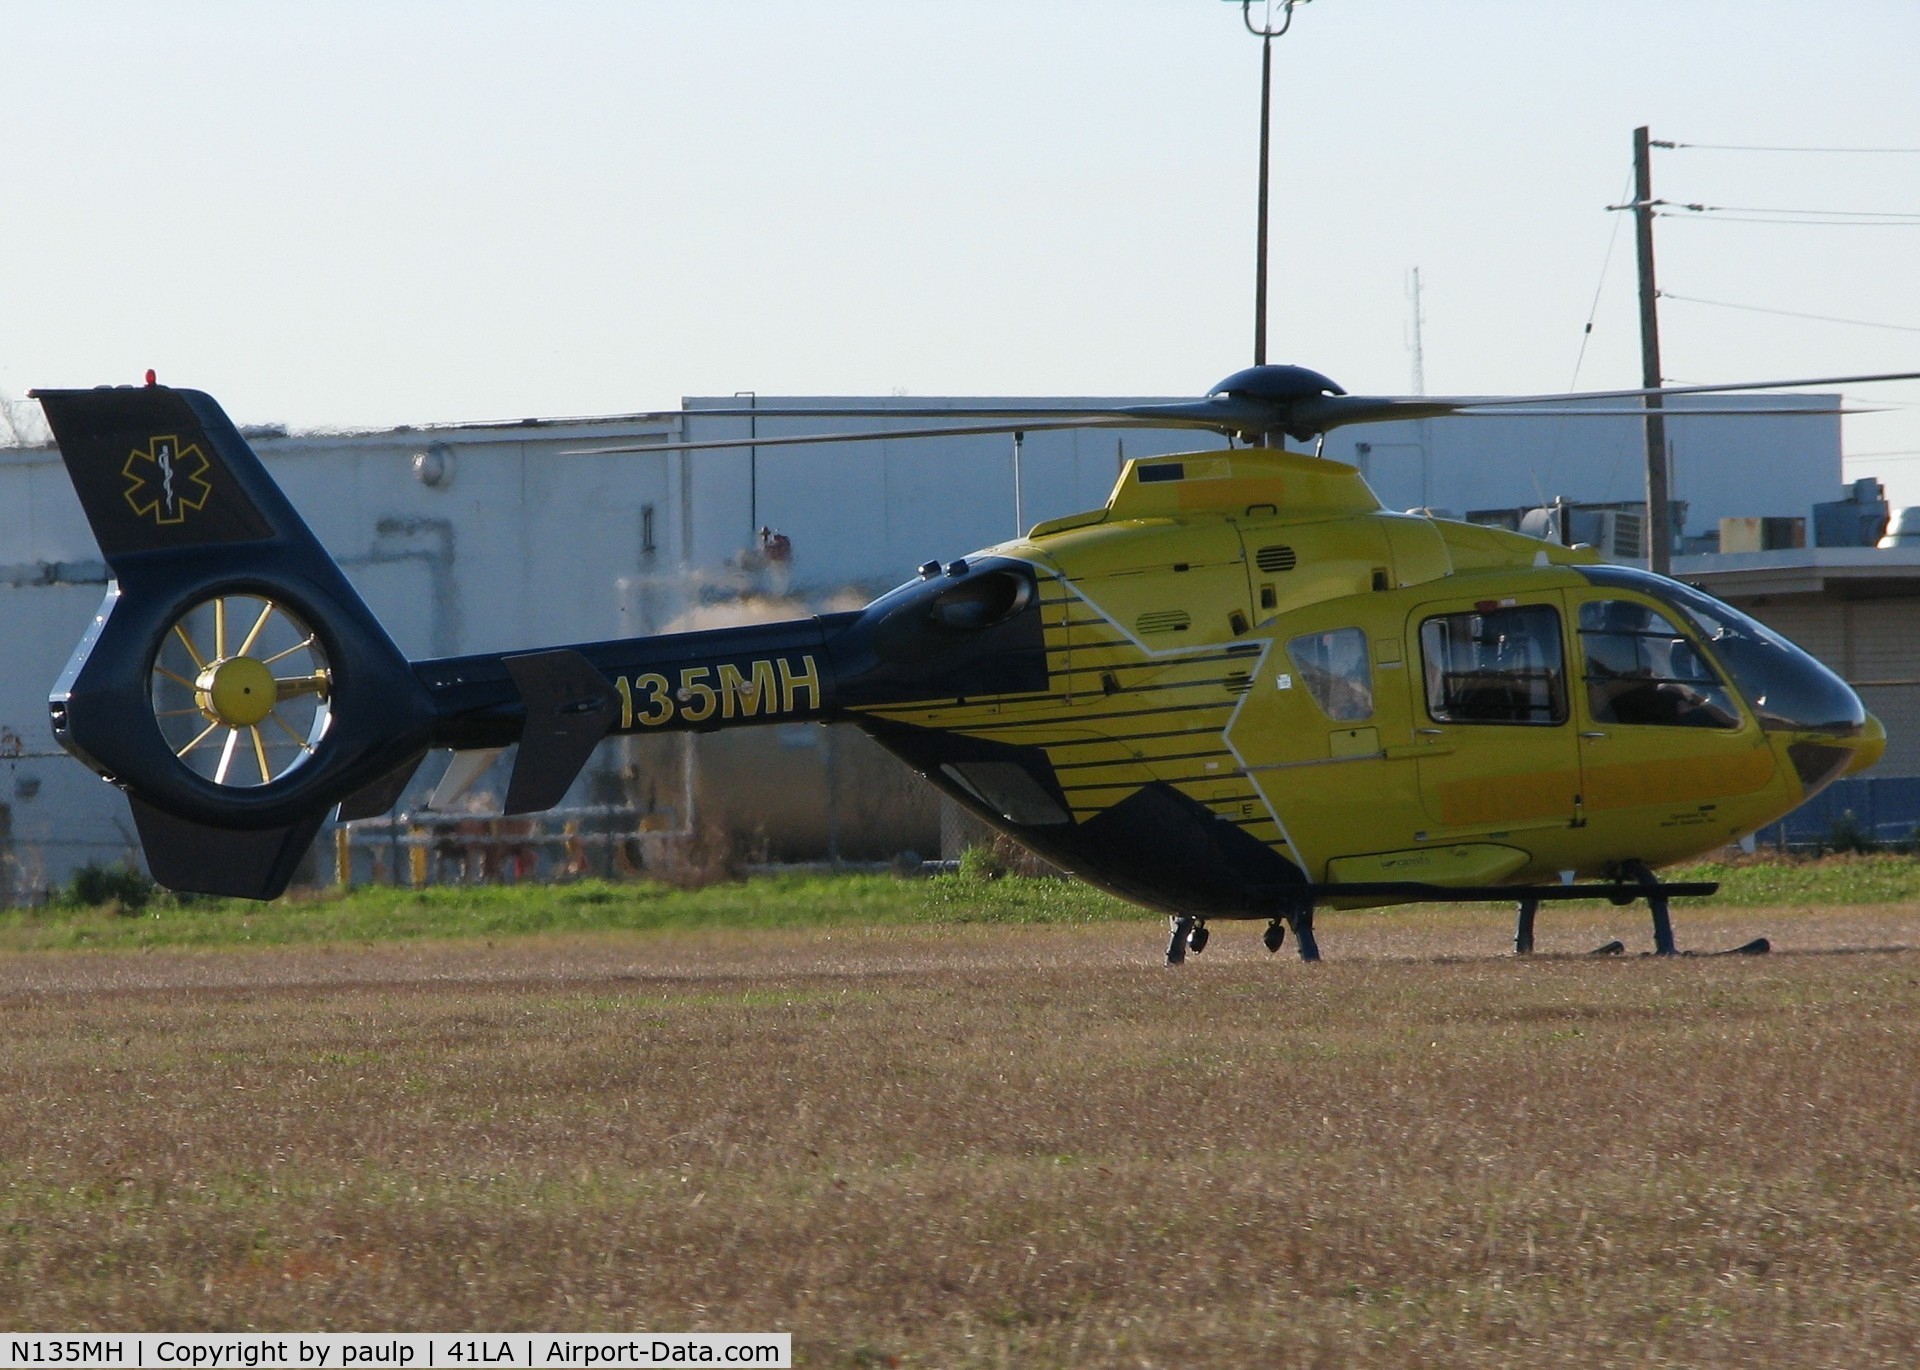 N135MH, 2000 Eurocopter EC-135T-1 C/N 0131, At Metro Aviation near the Downtown Shreveport airport.